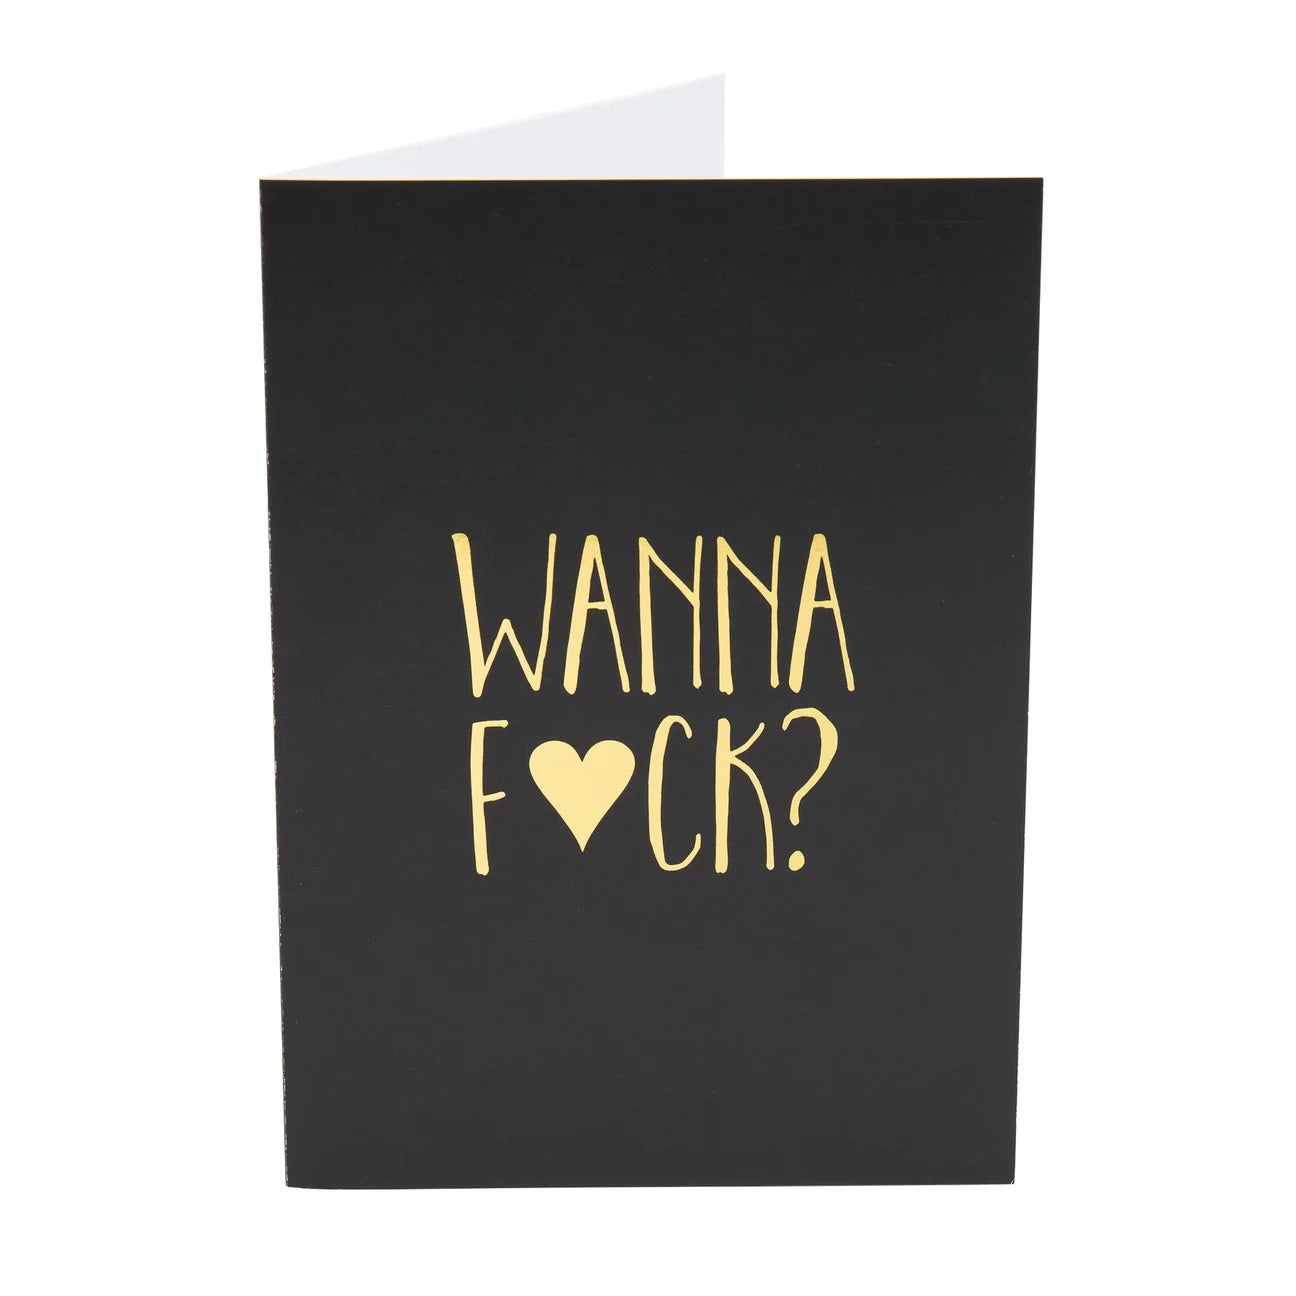 NAUGHTY NOTES Card: WANNA F*CK?...ME TOO! Includes Samples, tips and cheeky card. - Boink Adult Boutique www.boinkmuskoka.com